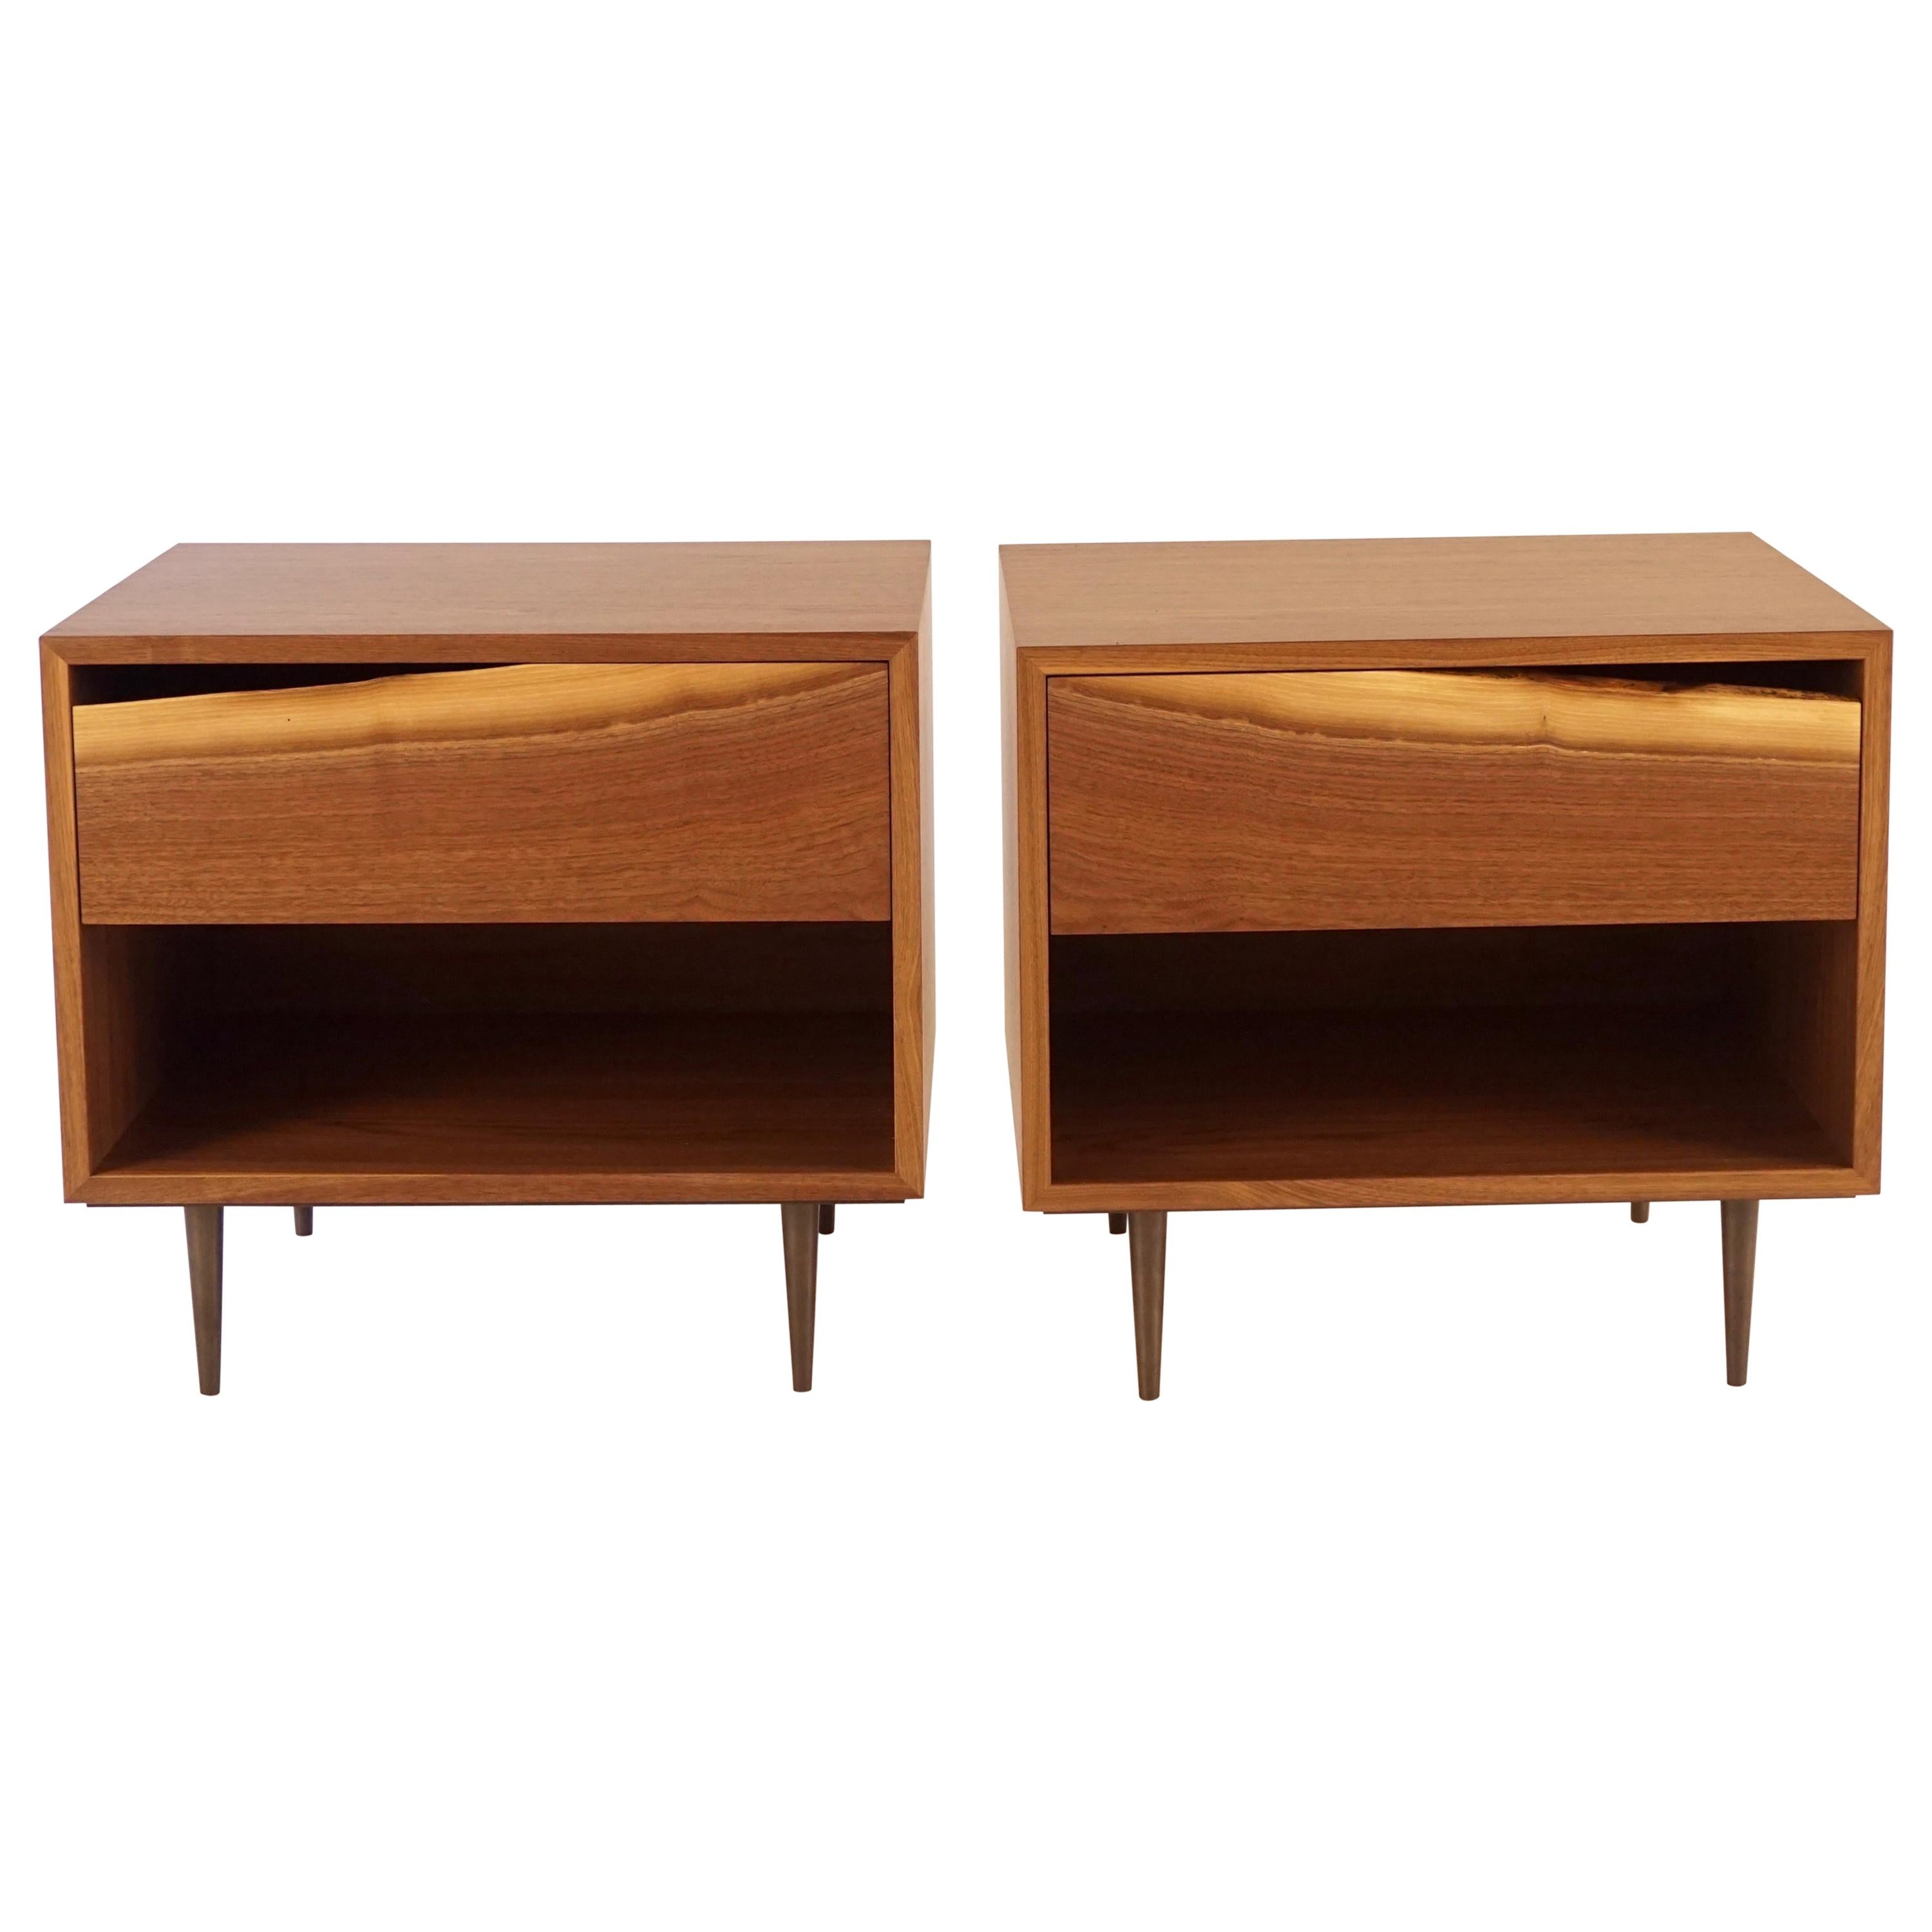 Walnut Bedside Table with Natural Edged Drawer-Fronts by Chris Lehrecke For Sale